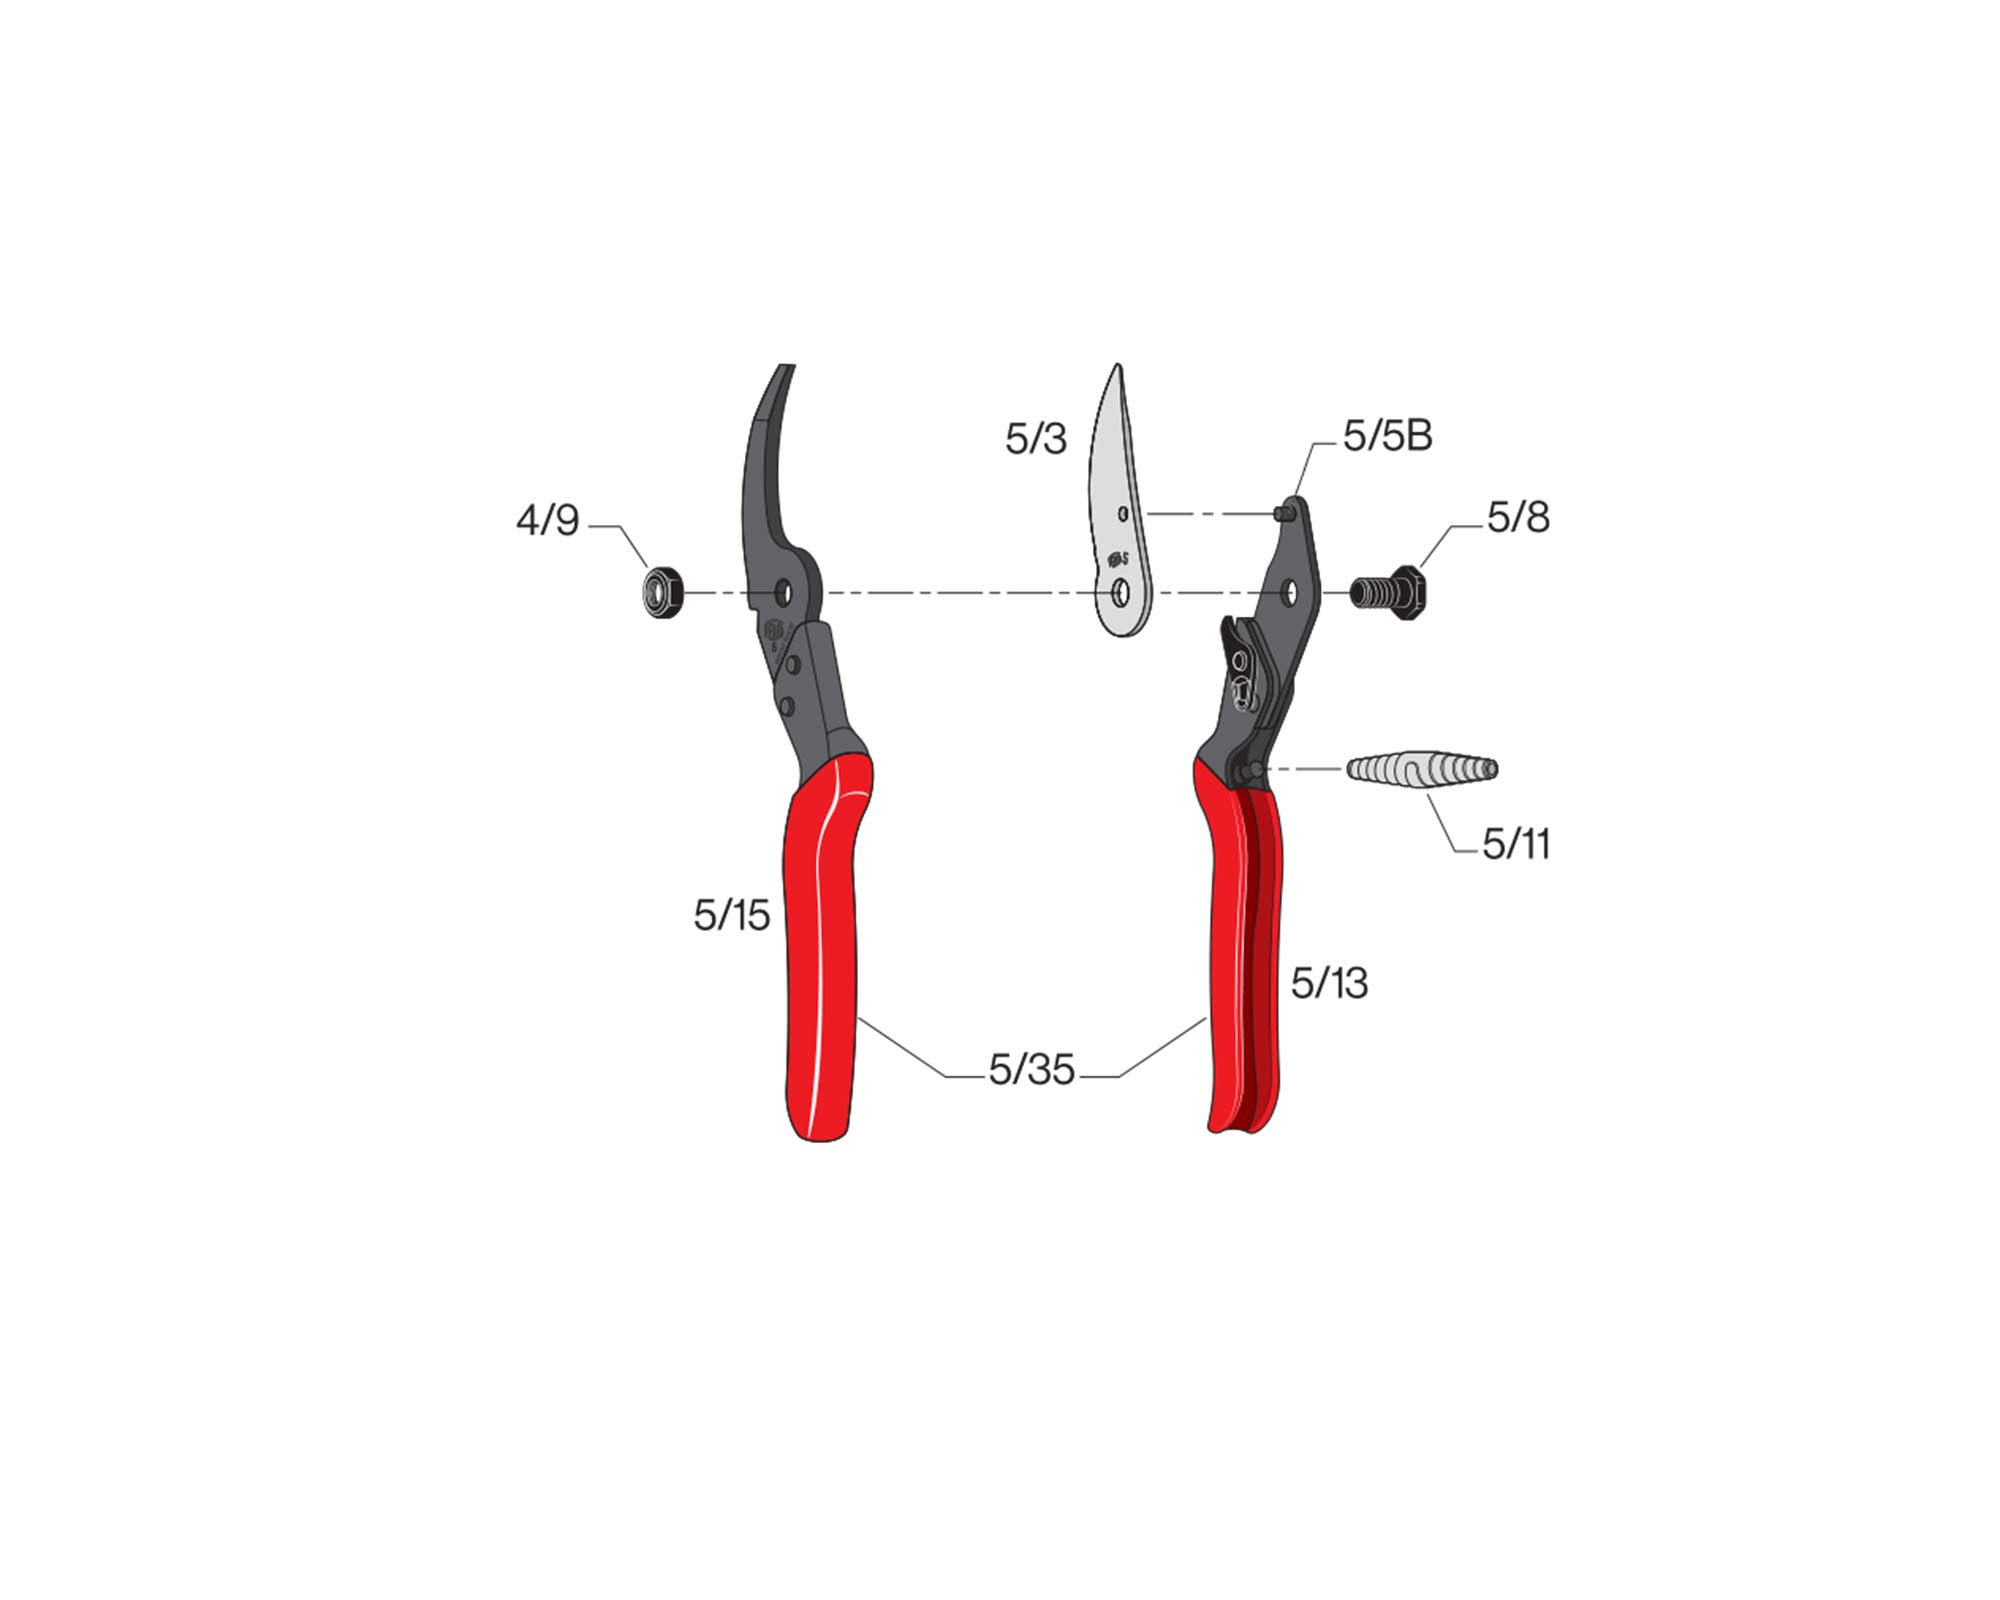 Exploded parts diagram for Felco 5 secateurs